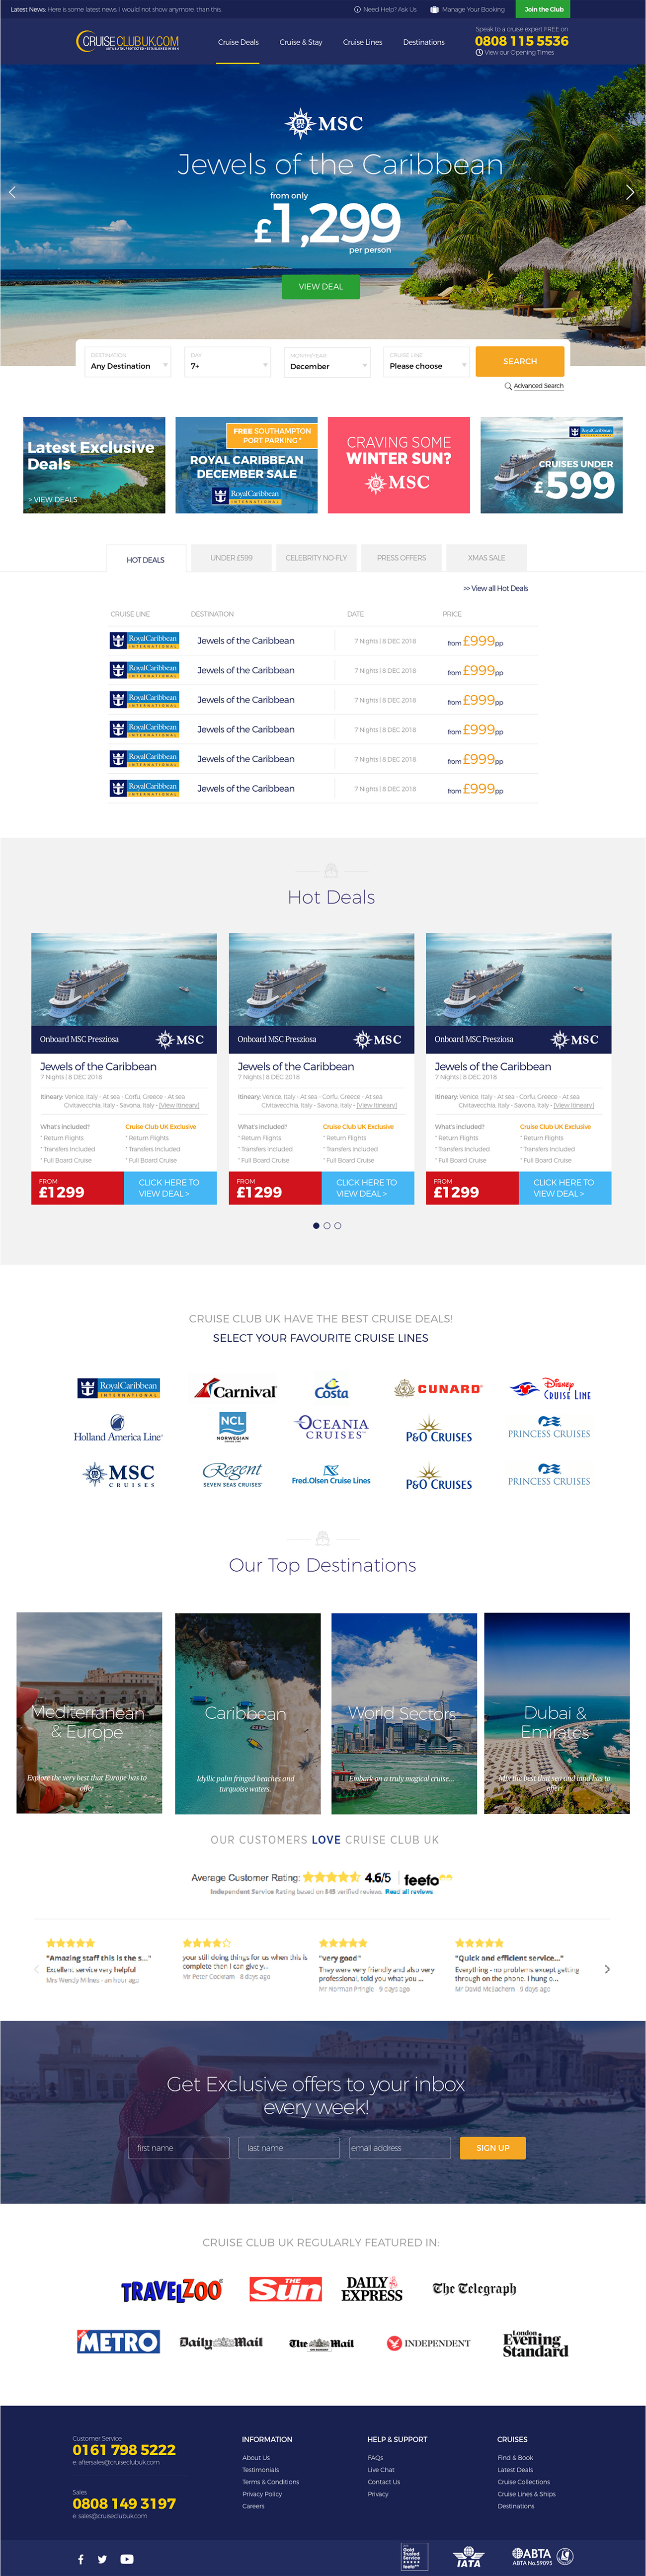 The homepage of the Cruise Club UK Website